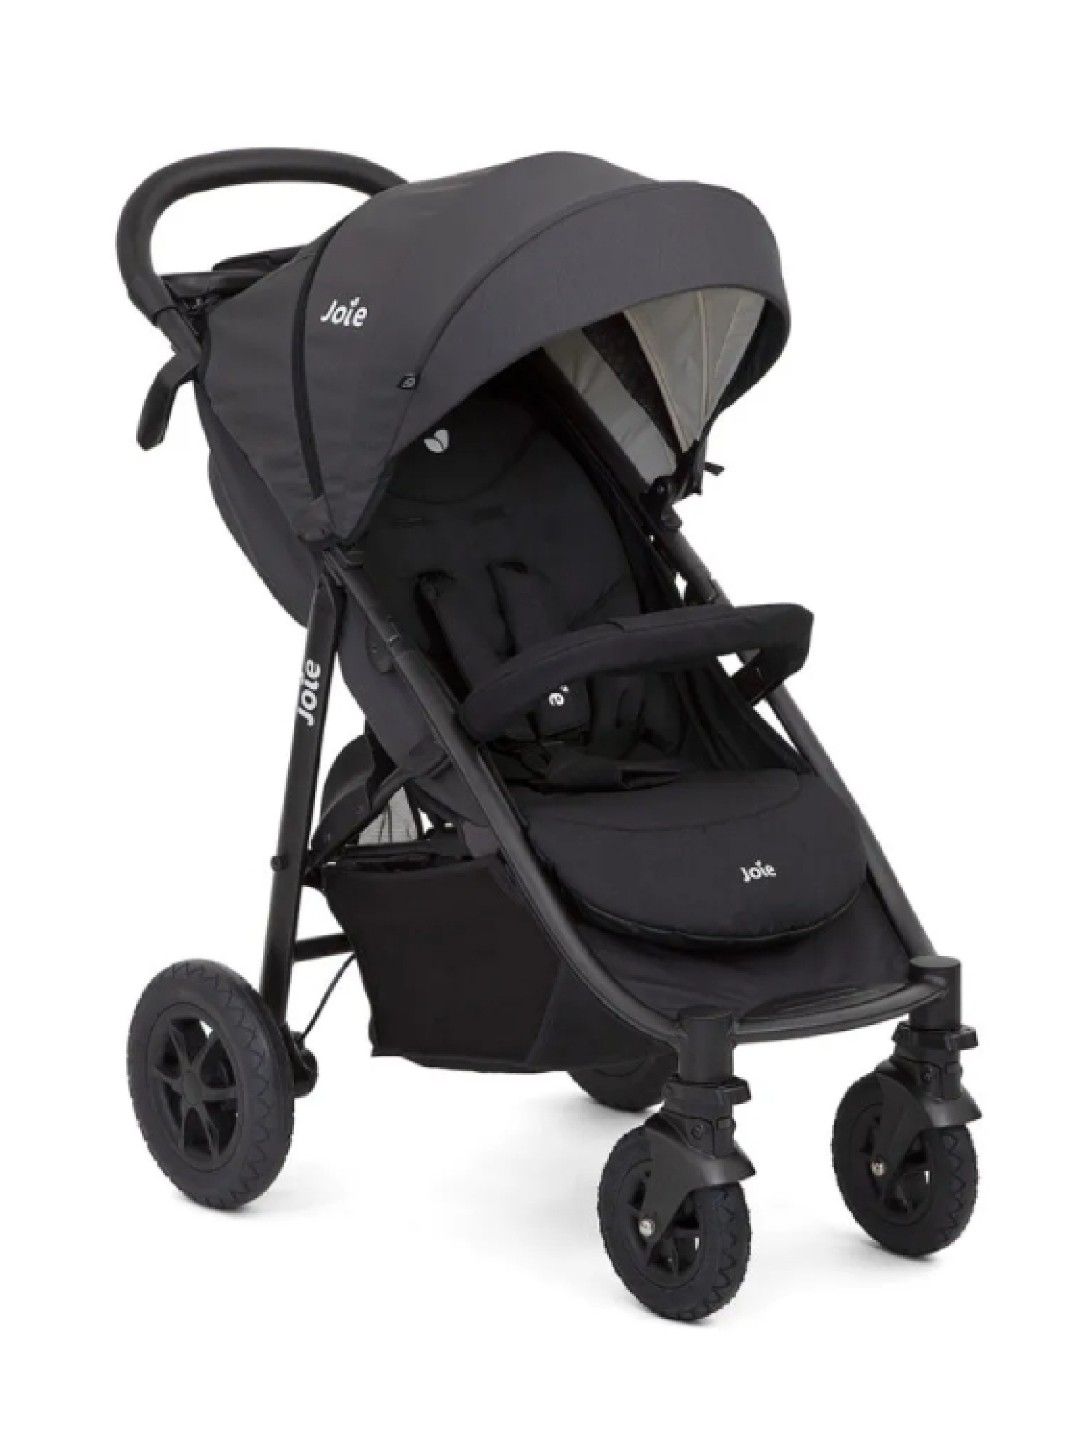 Joie Litetrax 4 Travel System - Coal (Stroller with Car Seat)